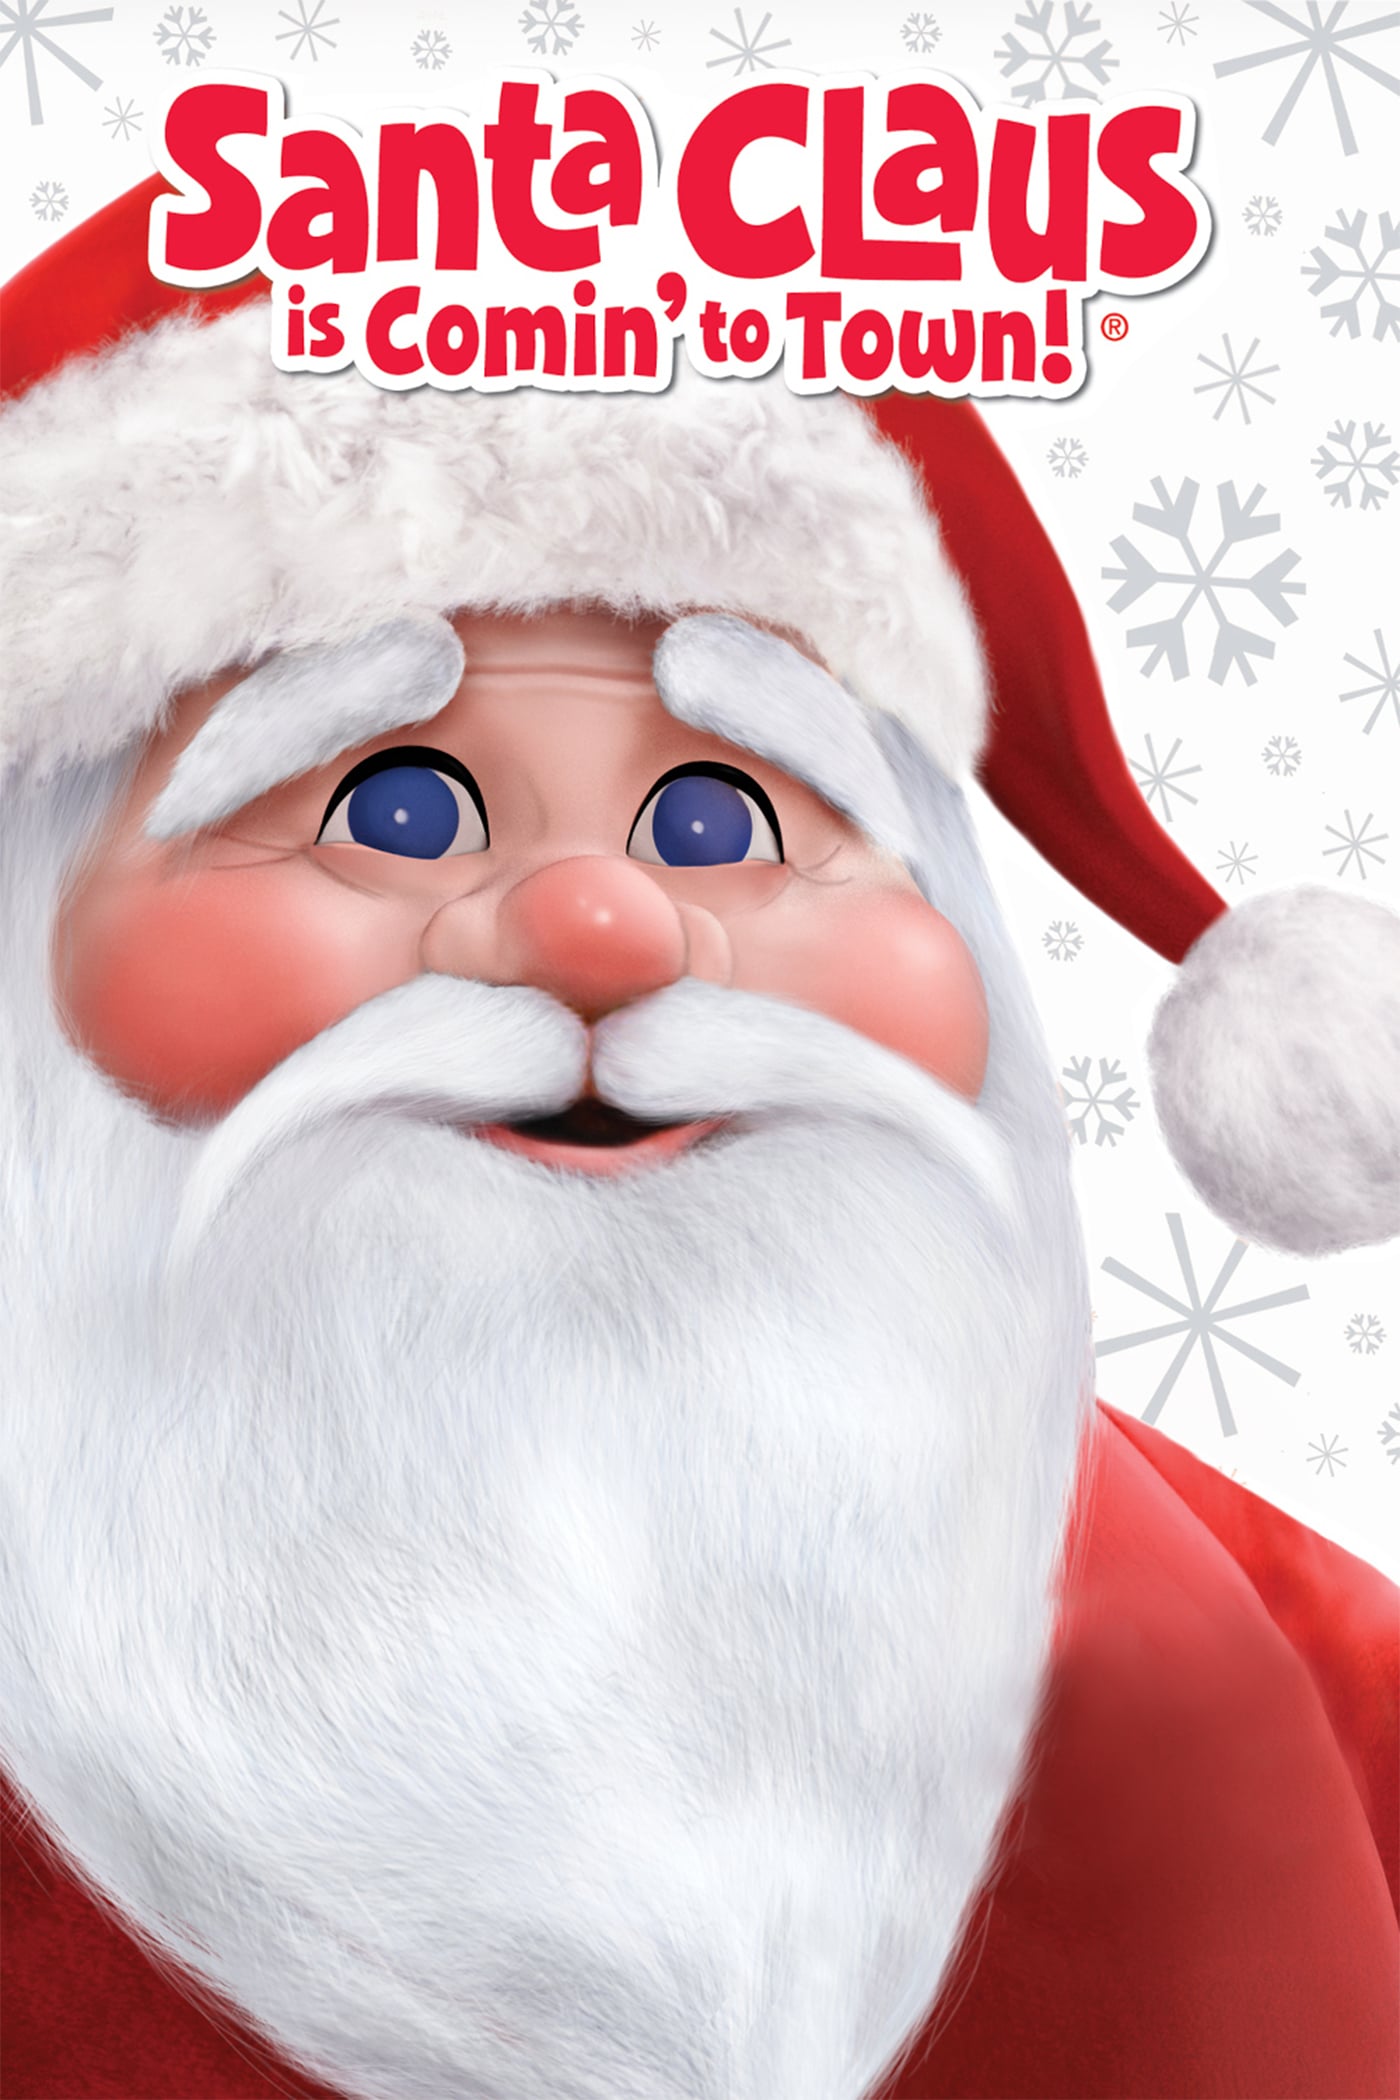 Poster for the movie "Santa Claus Is Comin' to Town"